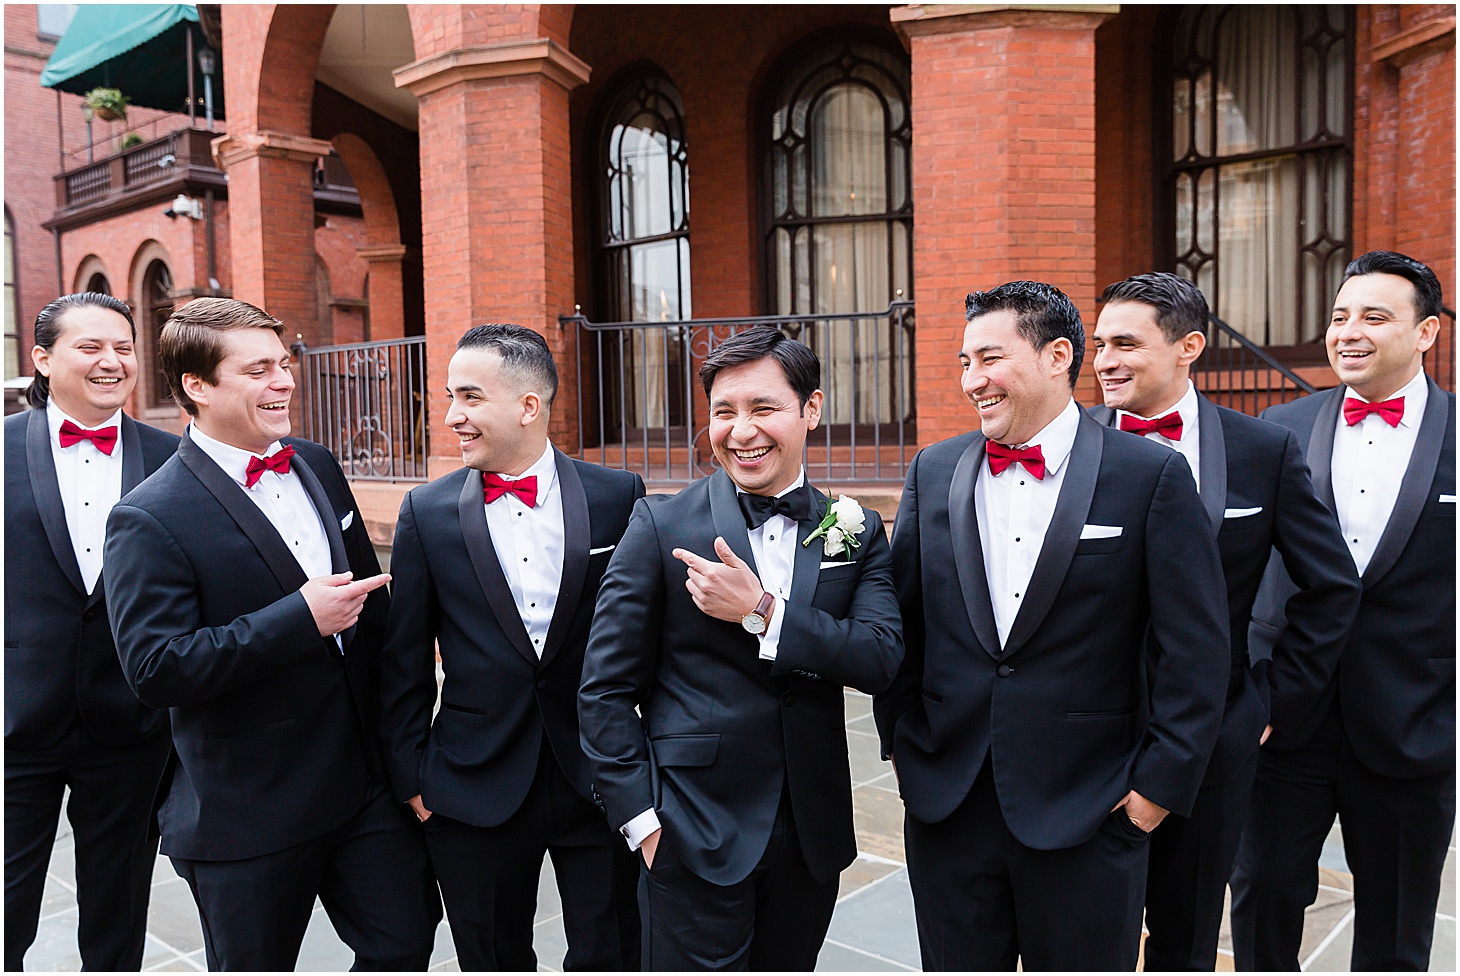 Groom and Groomsmen at Commonwealth Club, Ceremony at Grace and Holy Trinity Episcopal Church, Burgundy and Blush Christmas Wedding at Richmond’s Commonwealth Club, Sarah Bradshaw Photography